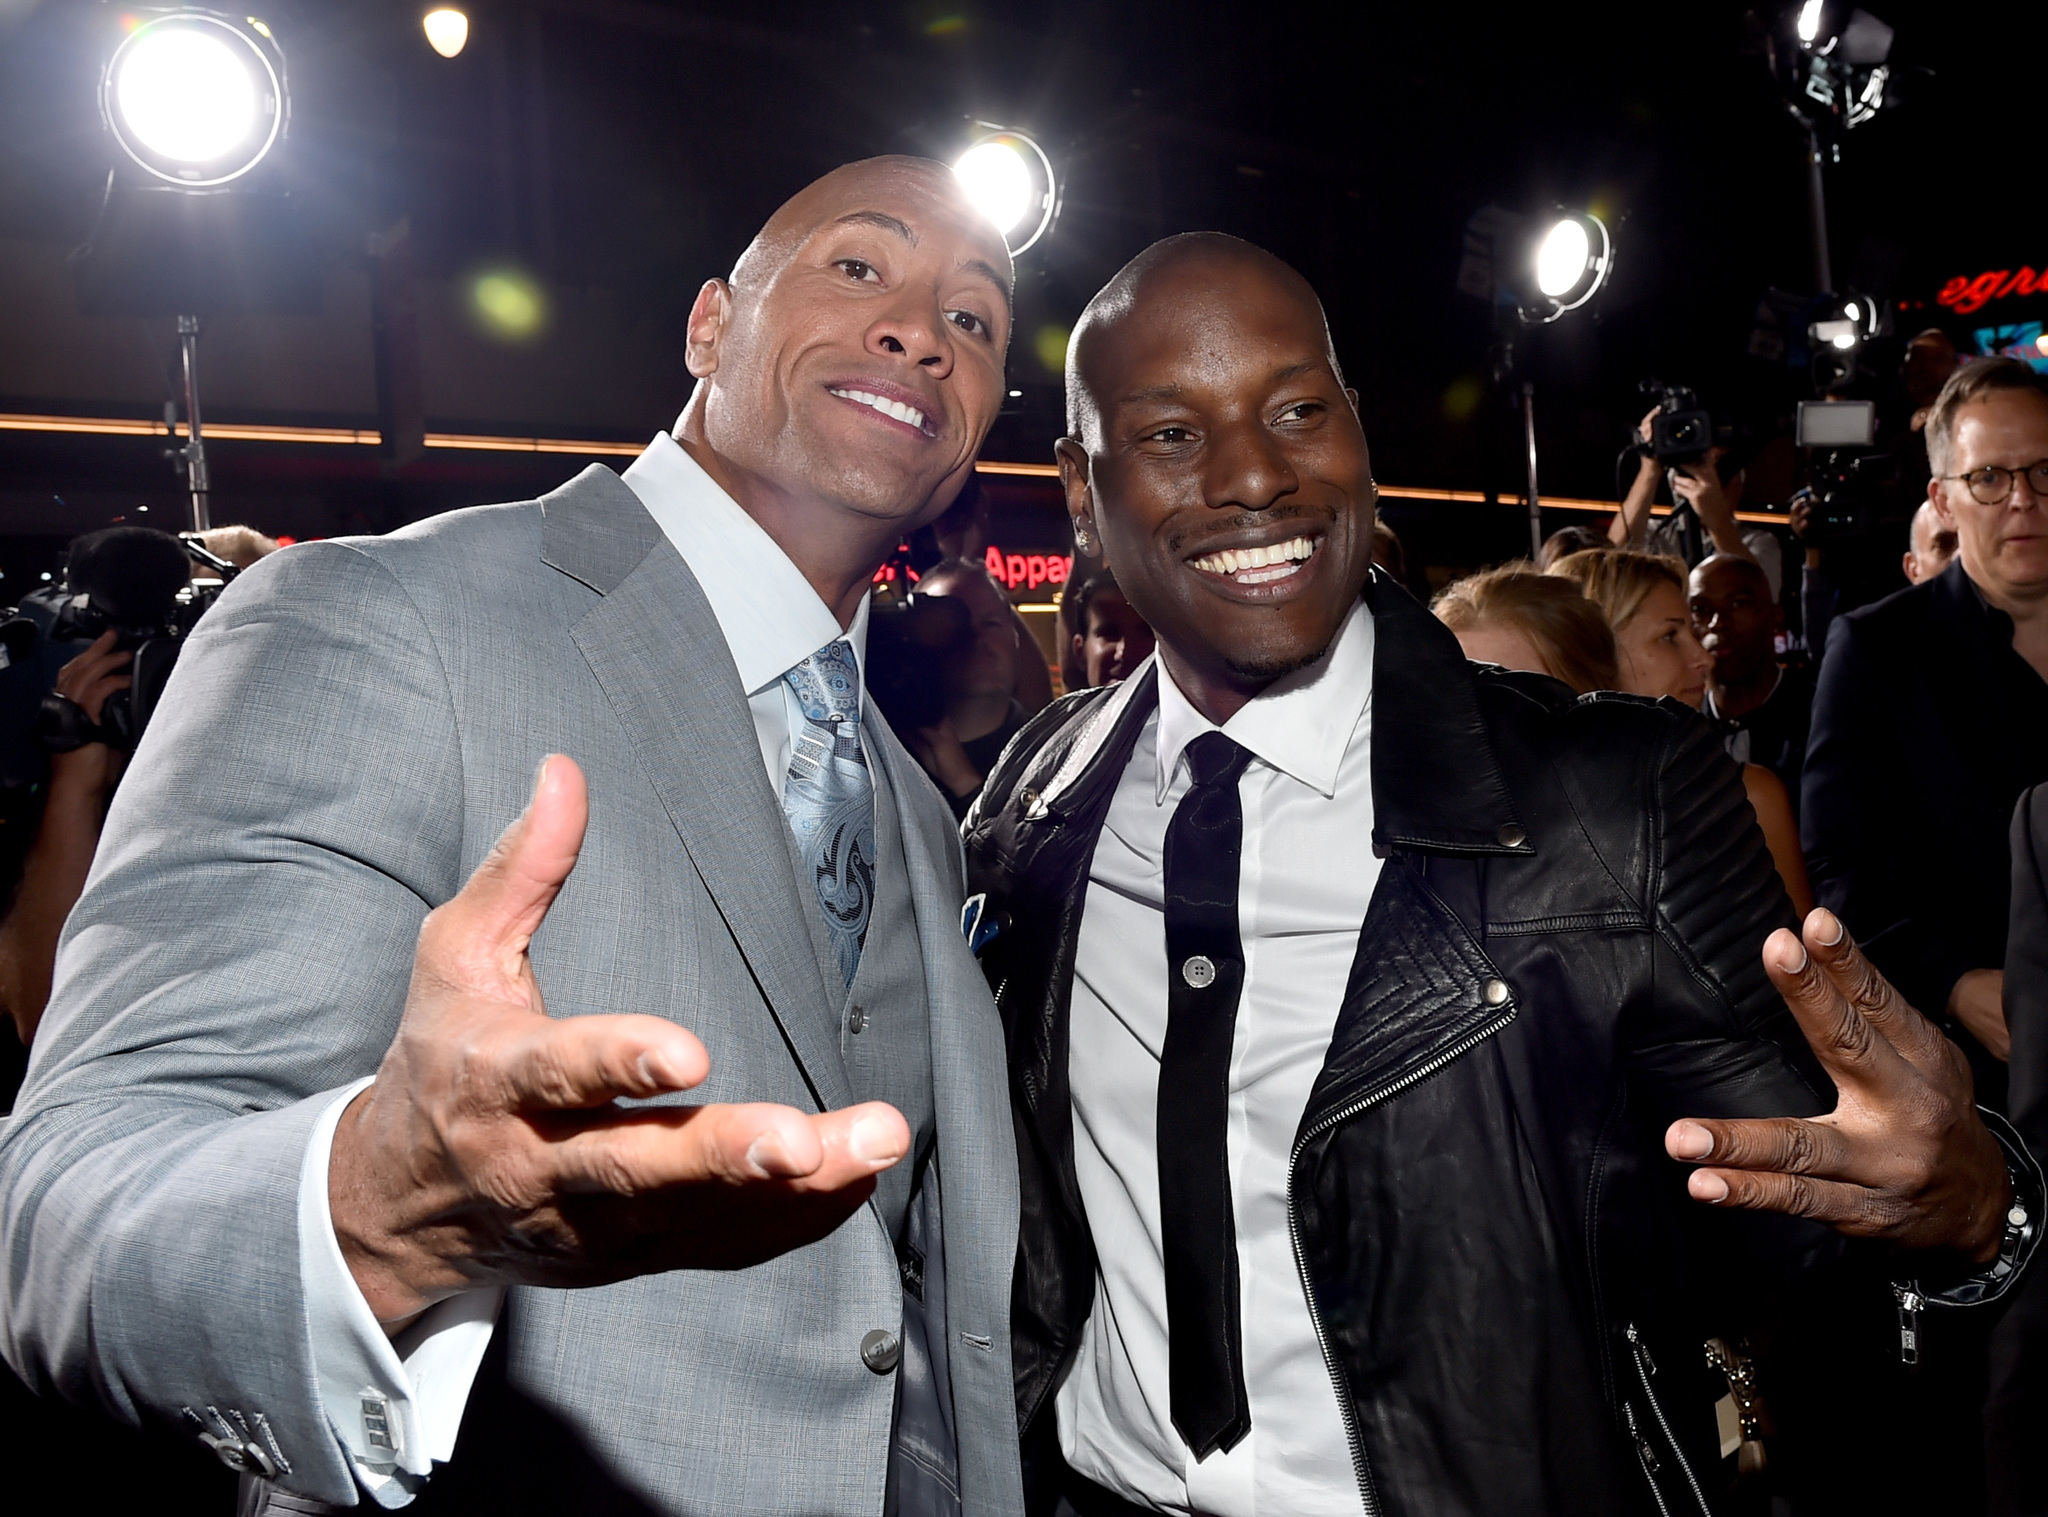 Dwayne Johnson and Tyrese Gibson at event of Greiti ir isiute 7 (2015)